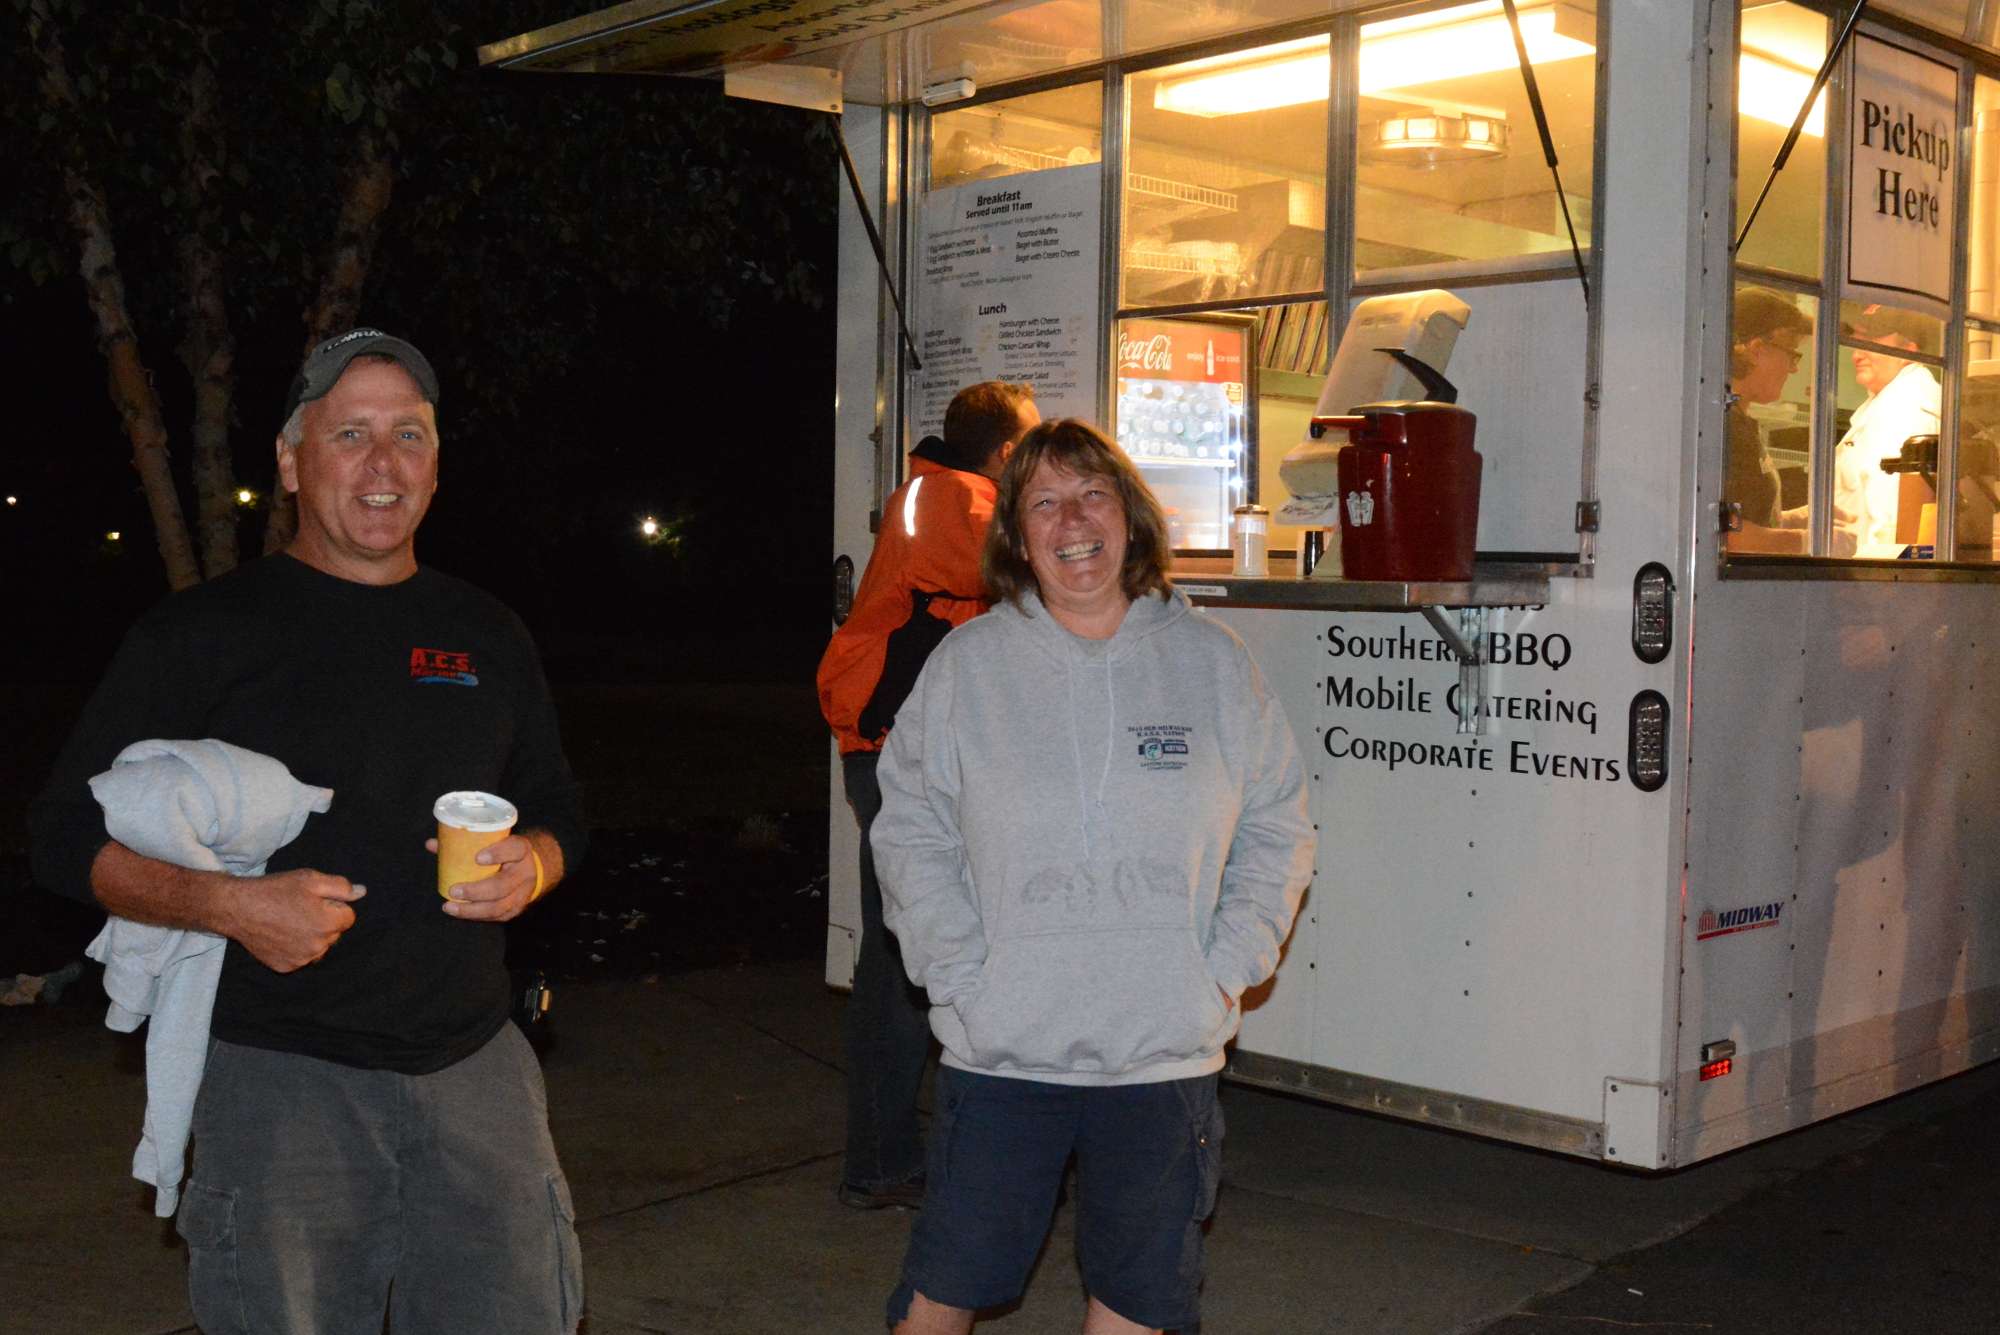 The Request-A-Chef truck is here serving breakfast sandwiches to the anglers and their supporters.